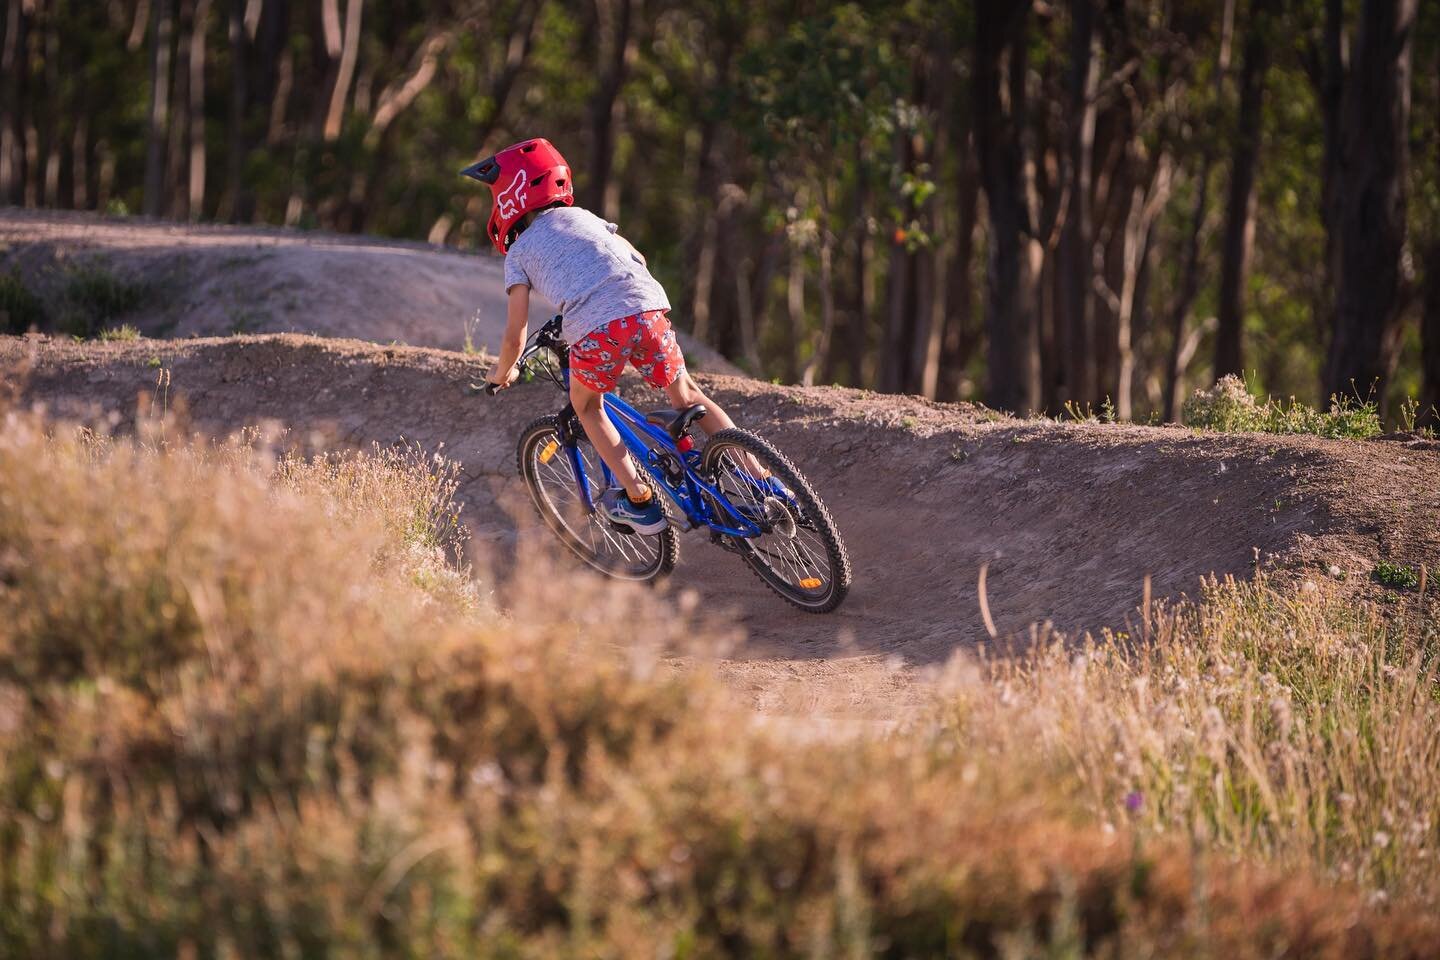 Starting to make plans for the weekend? You won&rsquo;t regret a visit to the Dungog Common Reserve - all the tracks &amp; trails are in great knick. #ridedungog #visitdungog #dungog 

📷 @readyaimmedia